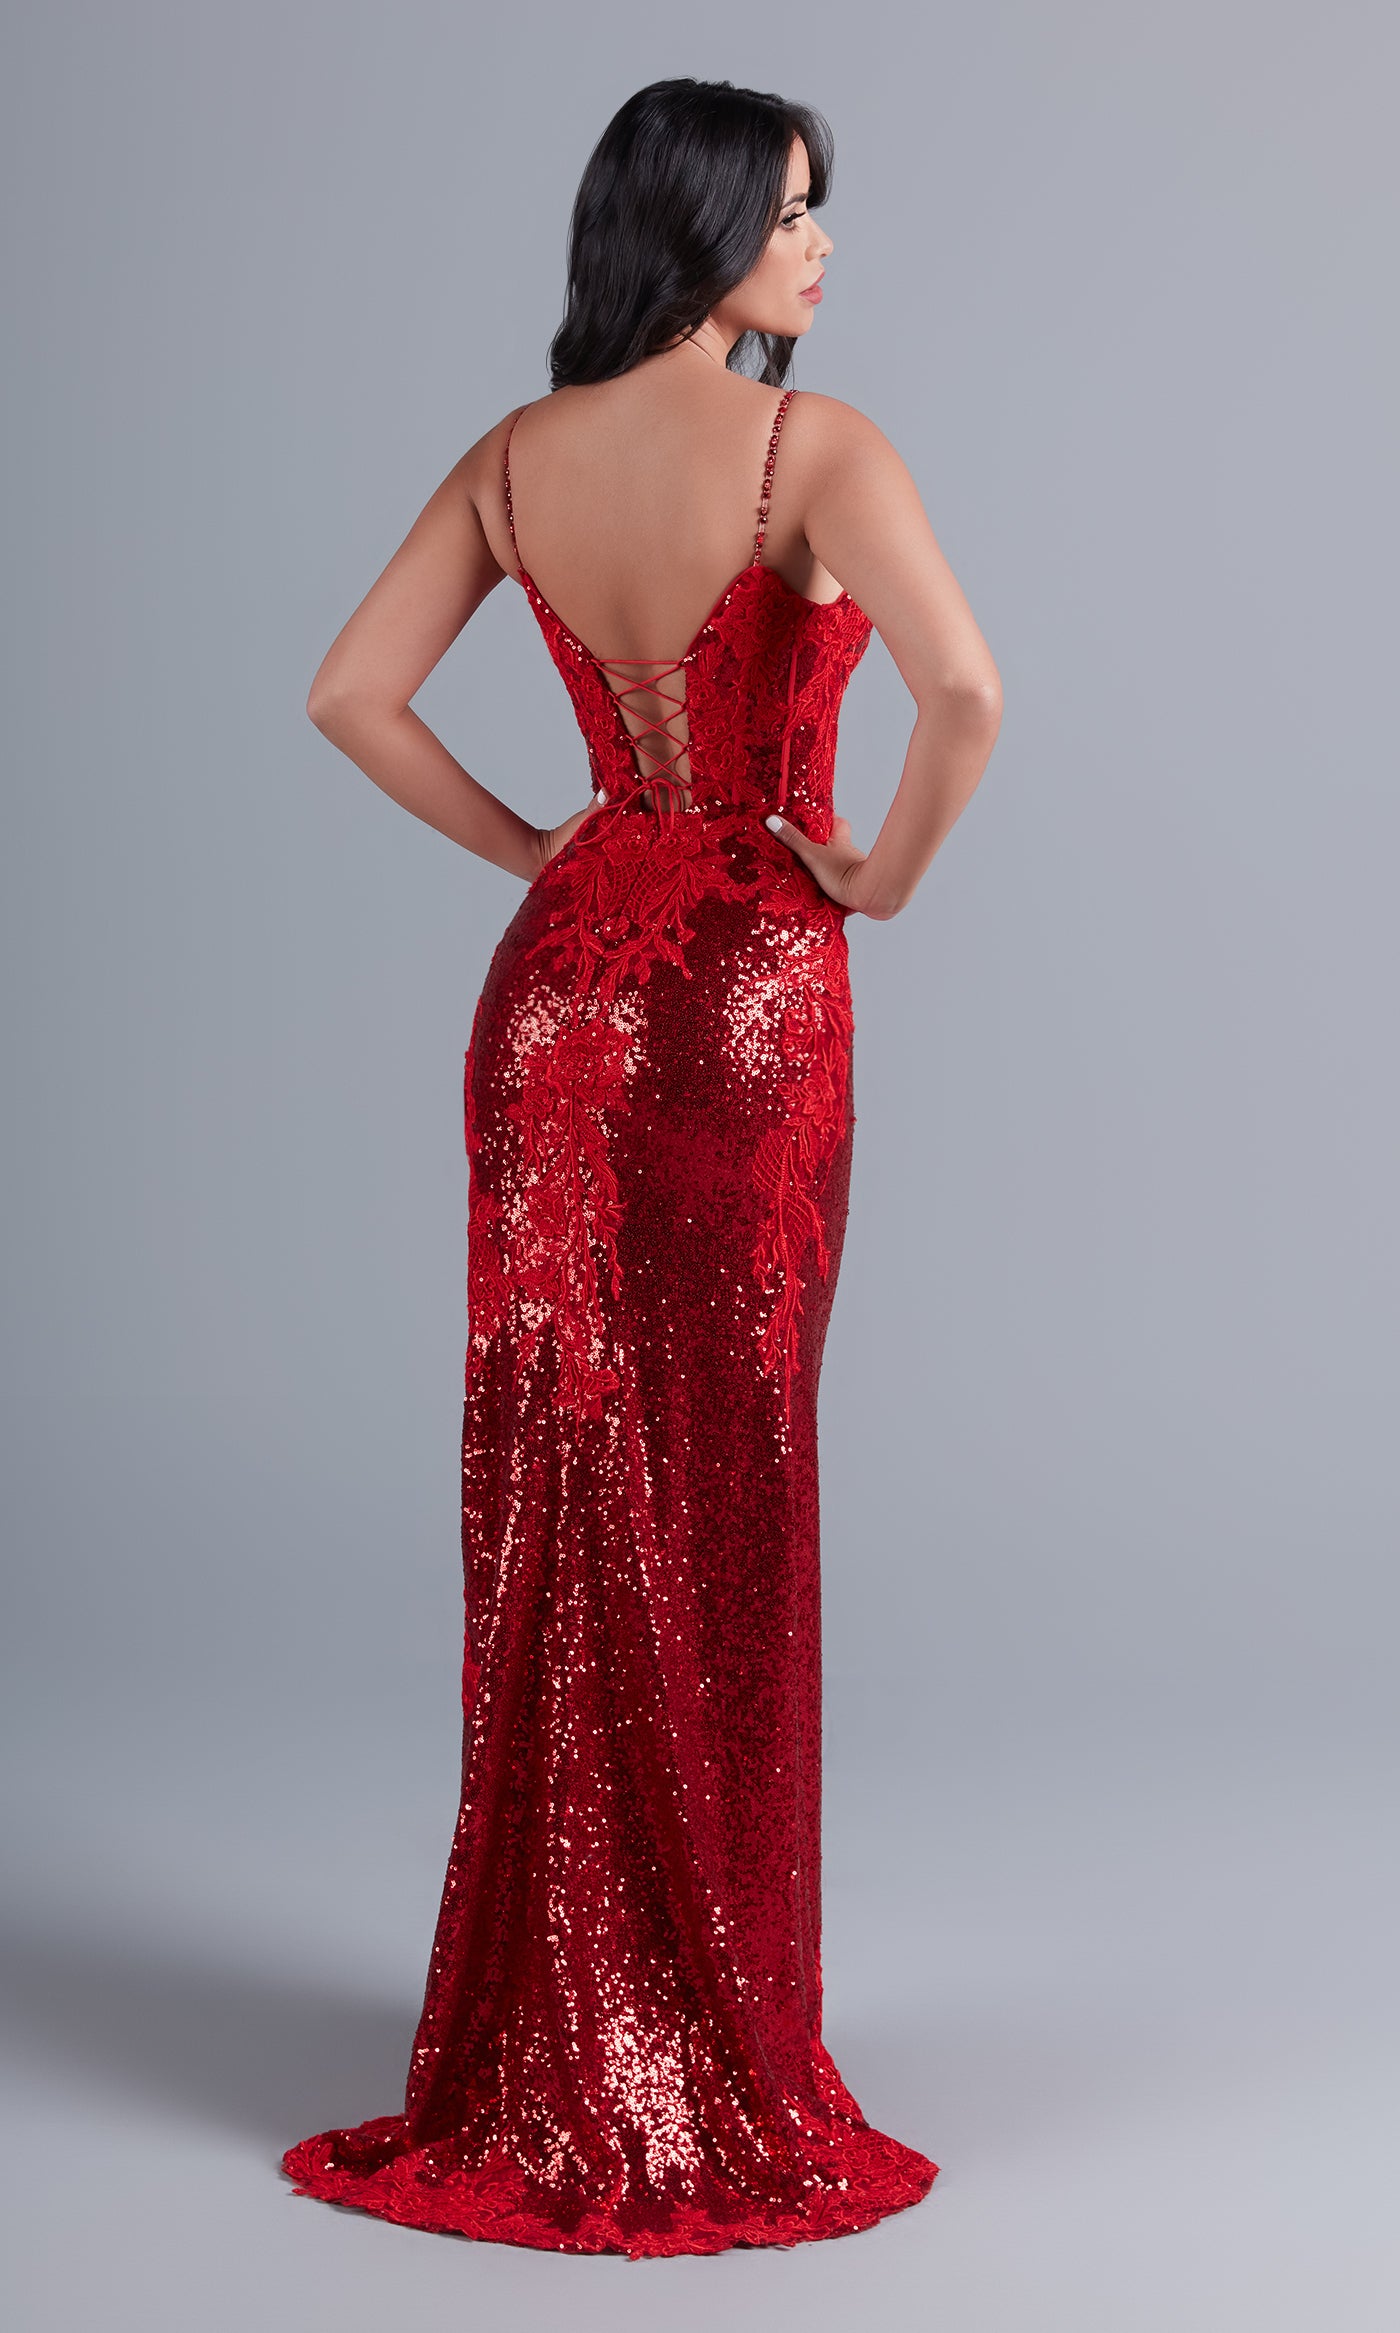 Sparkly Bright Red Sequin Long Prom Dress - PromGirl